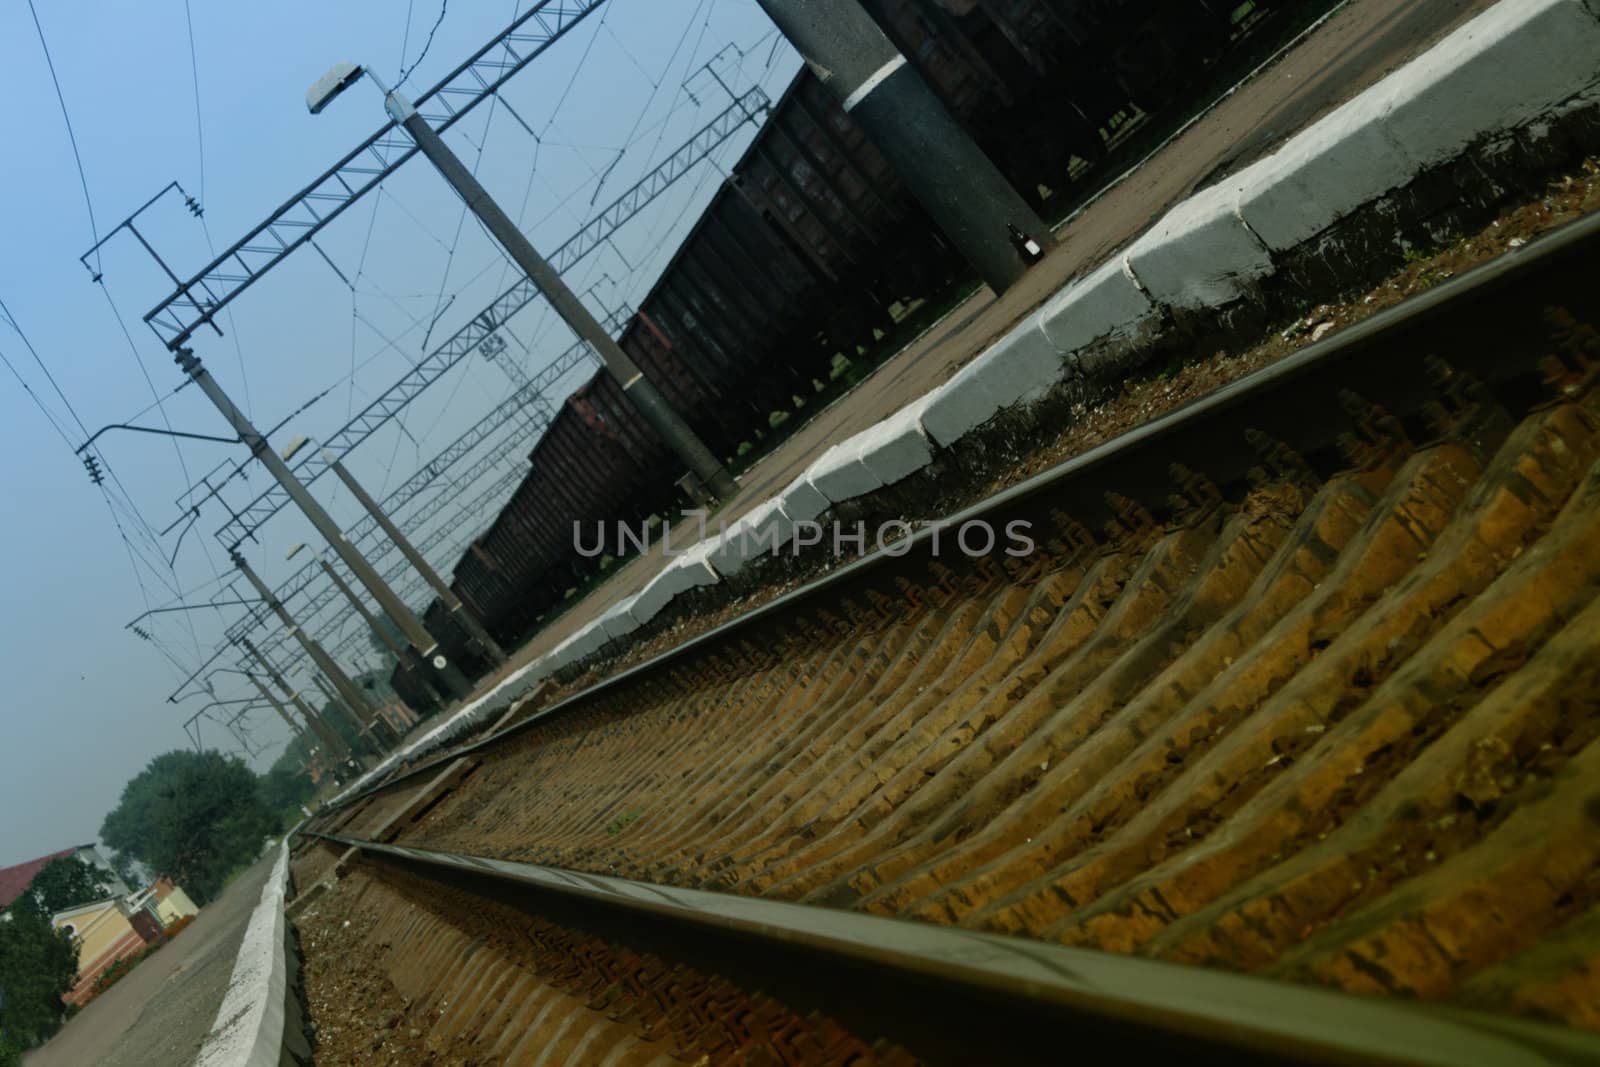 Railway station under an inclination with a freight train